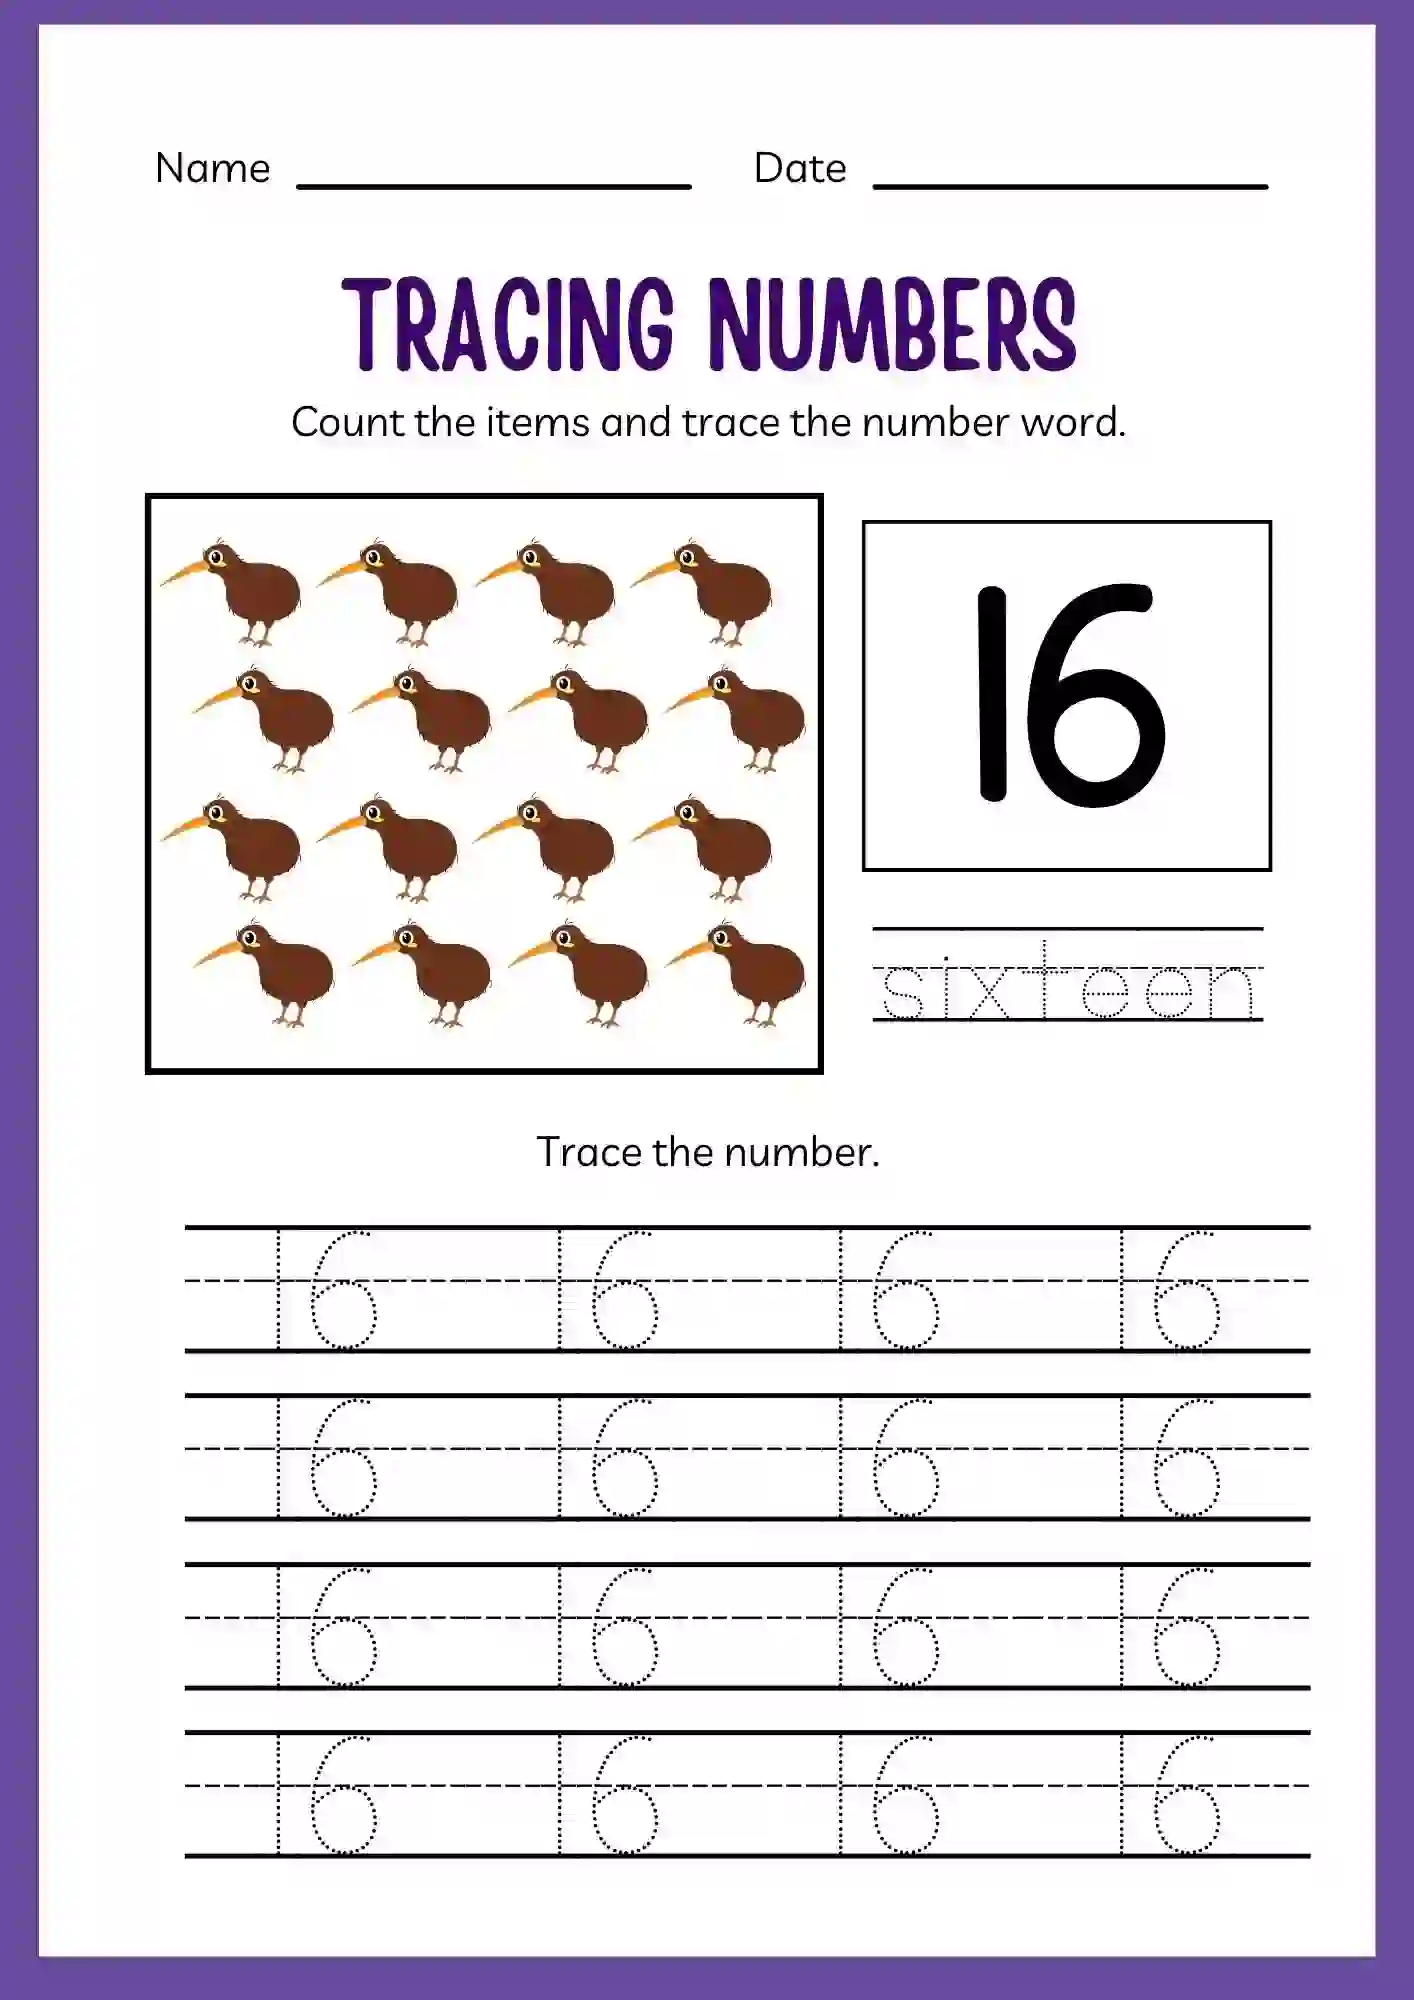 Number Tracing Worksheets 1 to 20 (Number 16 tracing sheet)